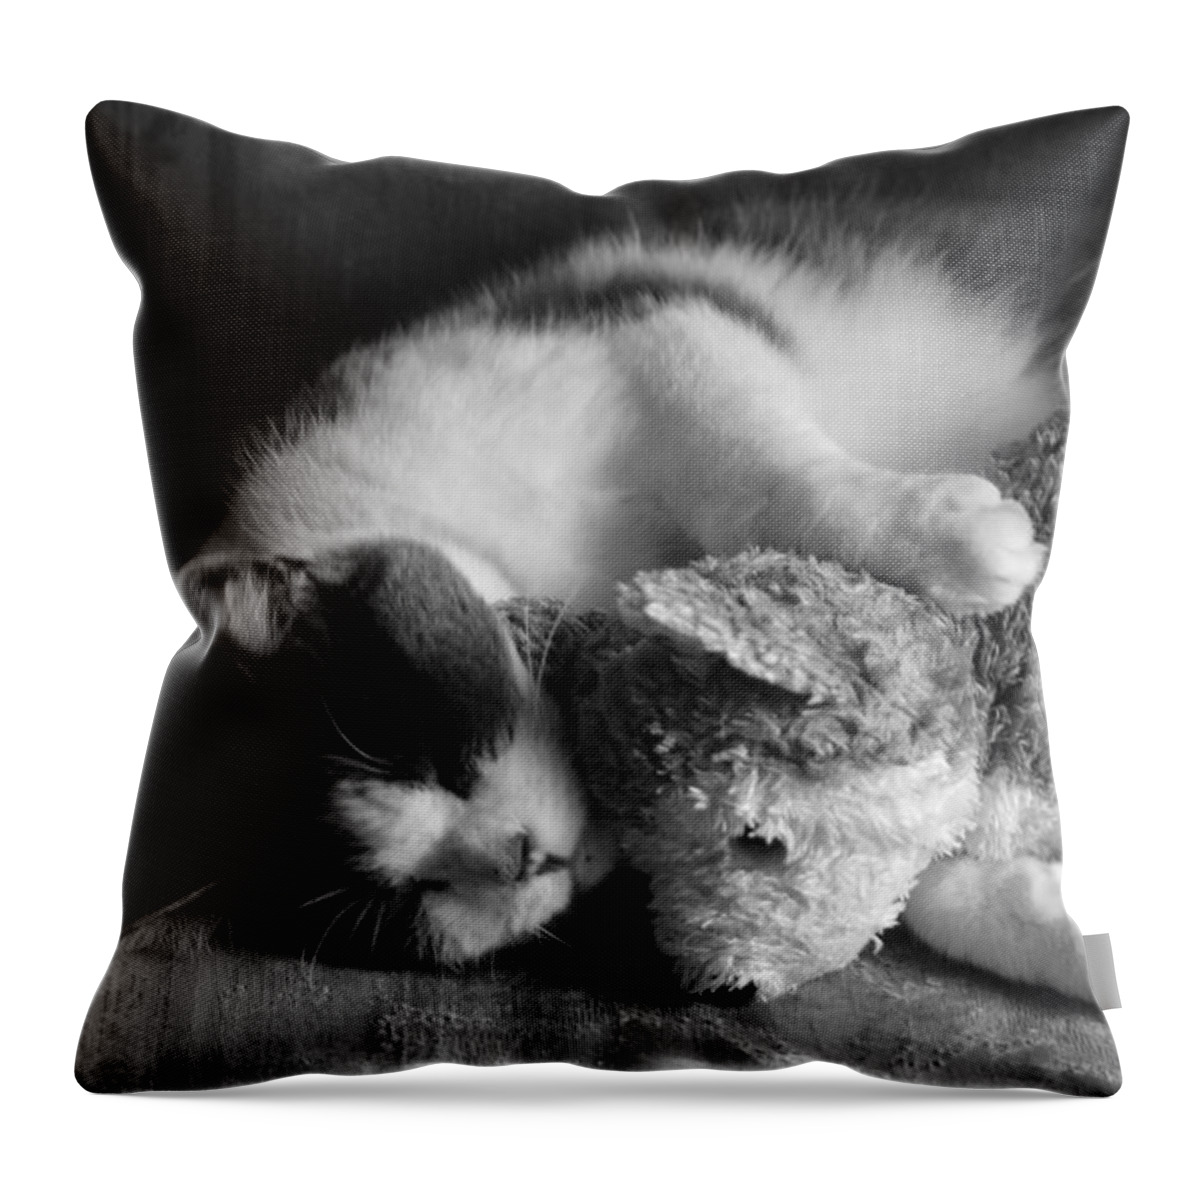  Throw Pillow featuring the photograph Friends by Michelle Hoffmann